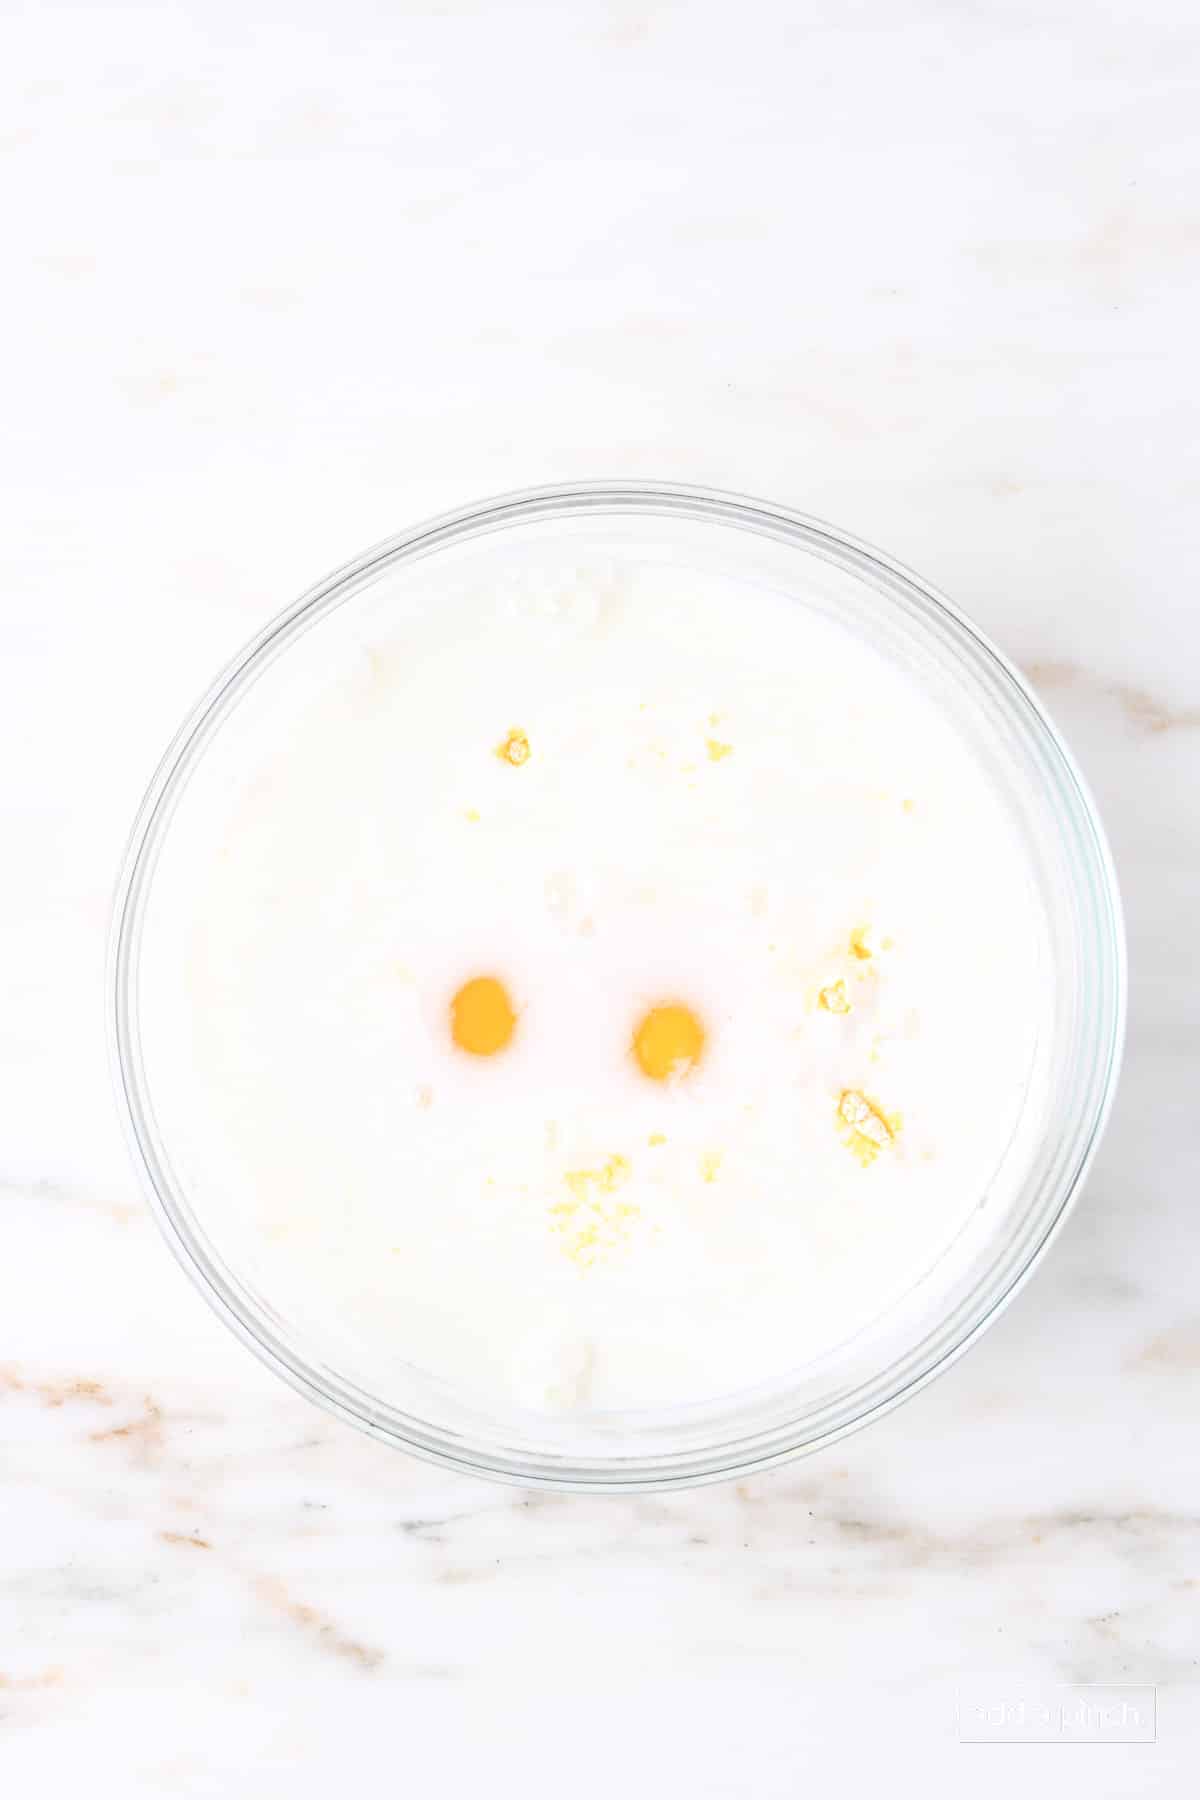 Eggs added to buttermilk and cornmeal mixture in a glass bowl.